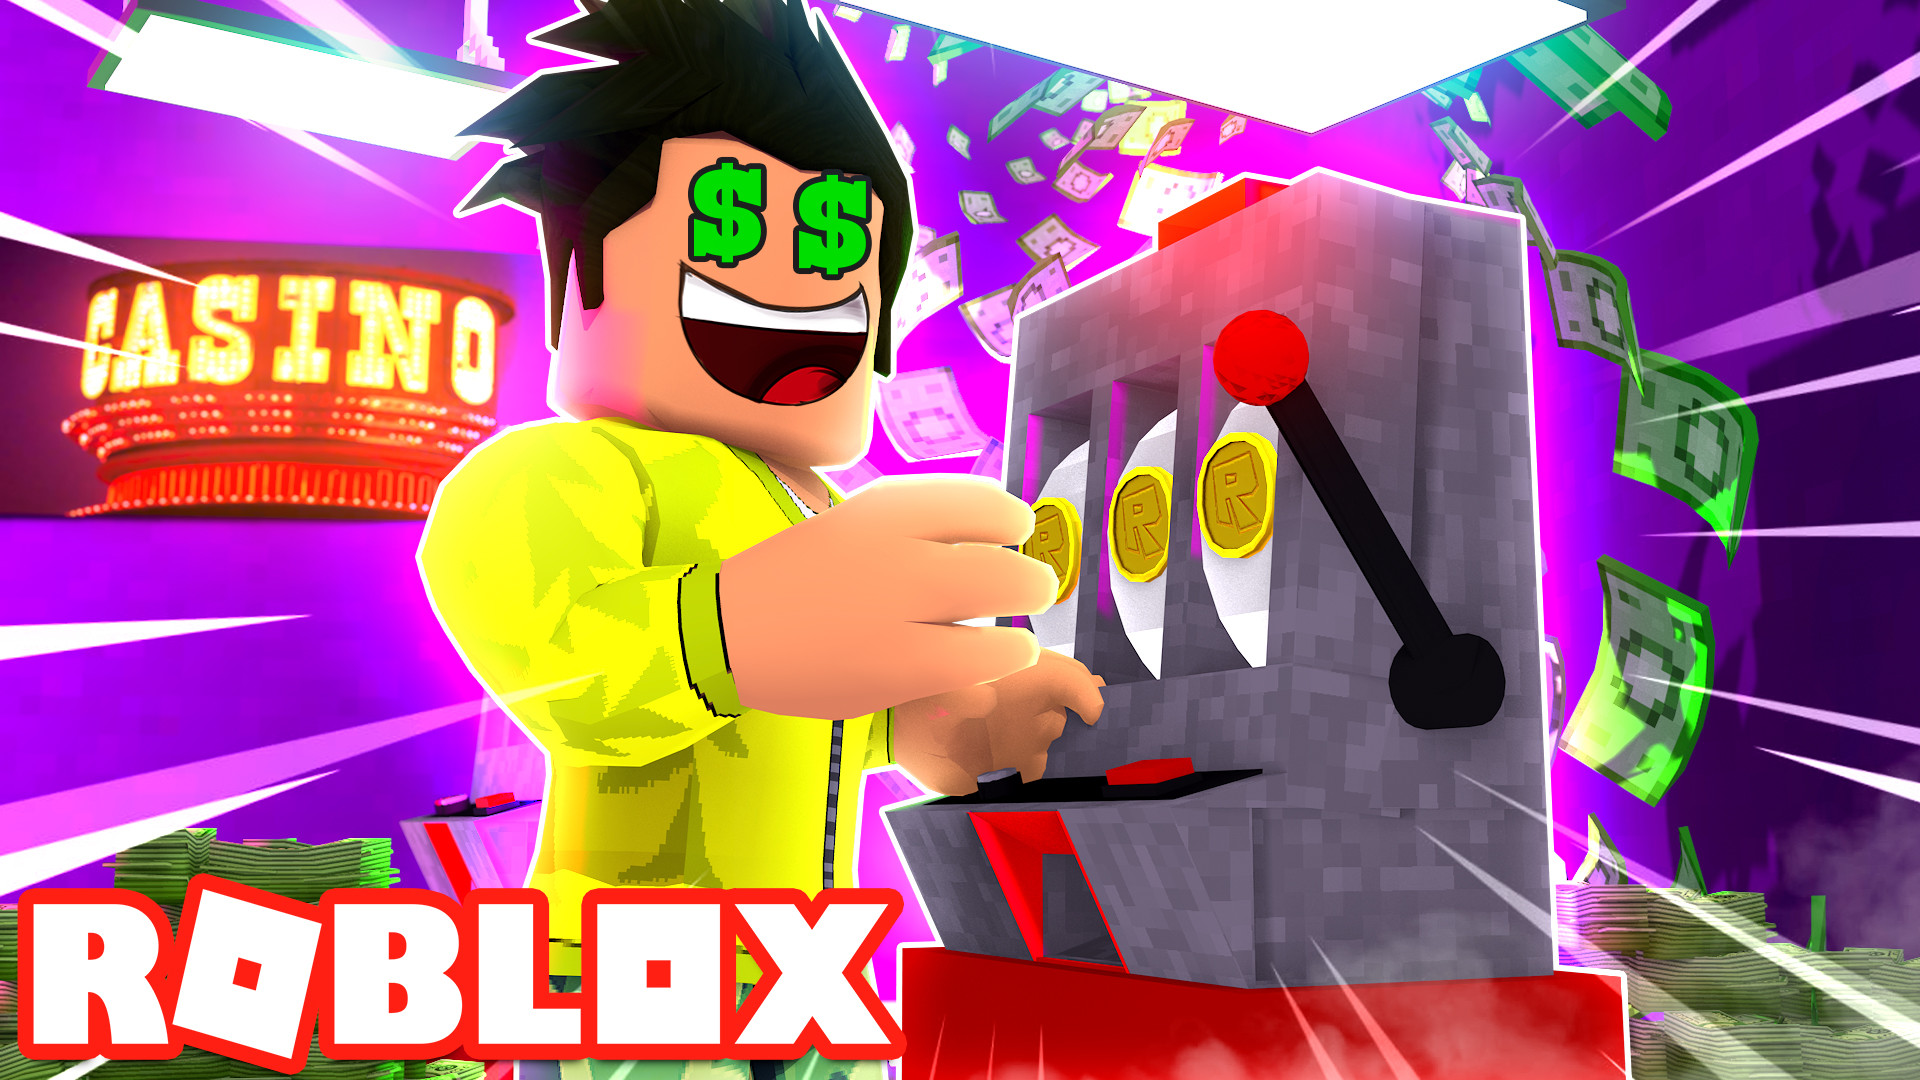 foxitor creations roblox studio thumbnail s for youtube